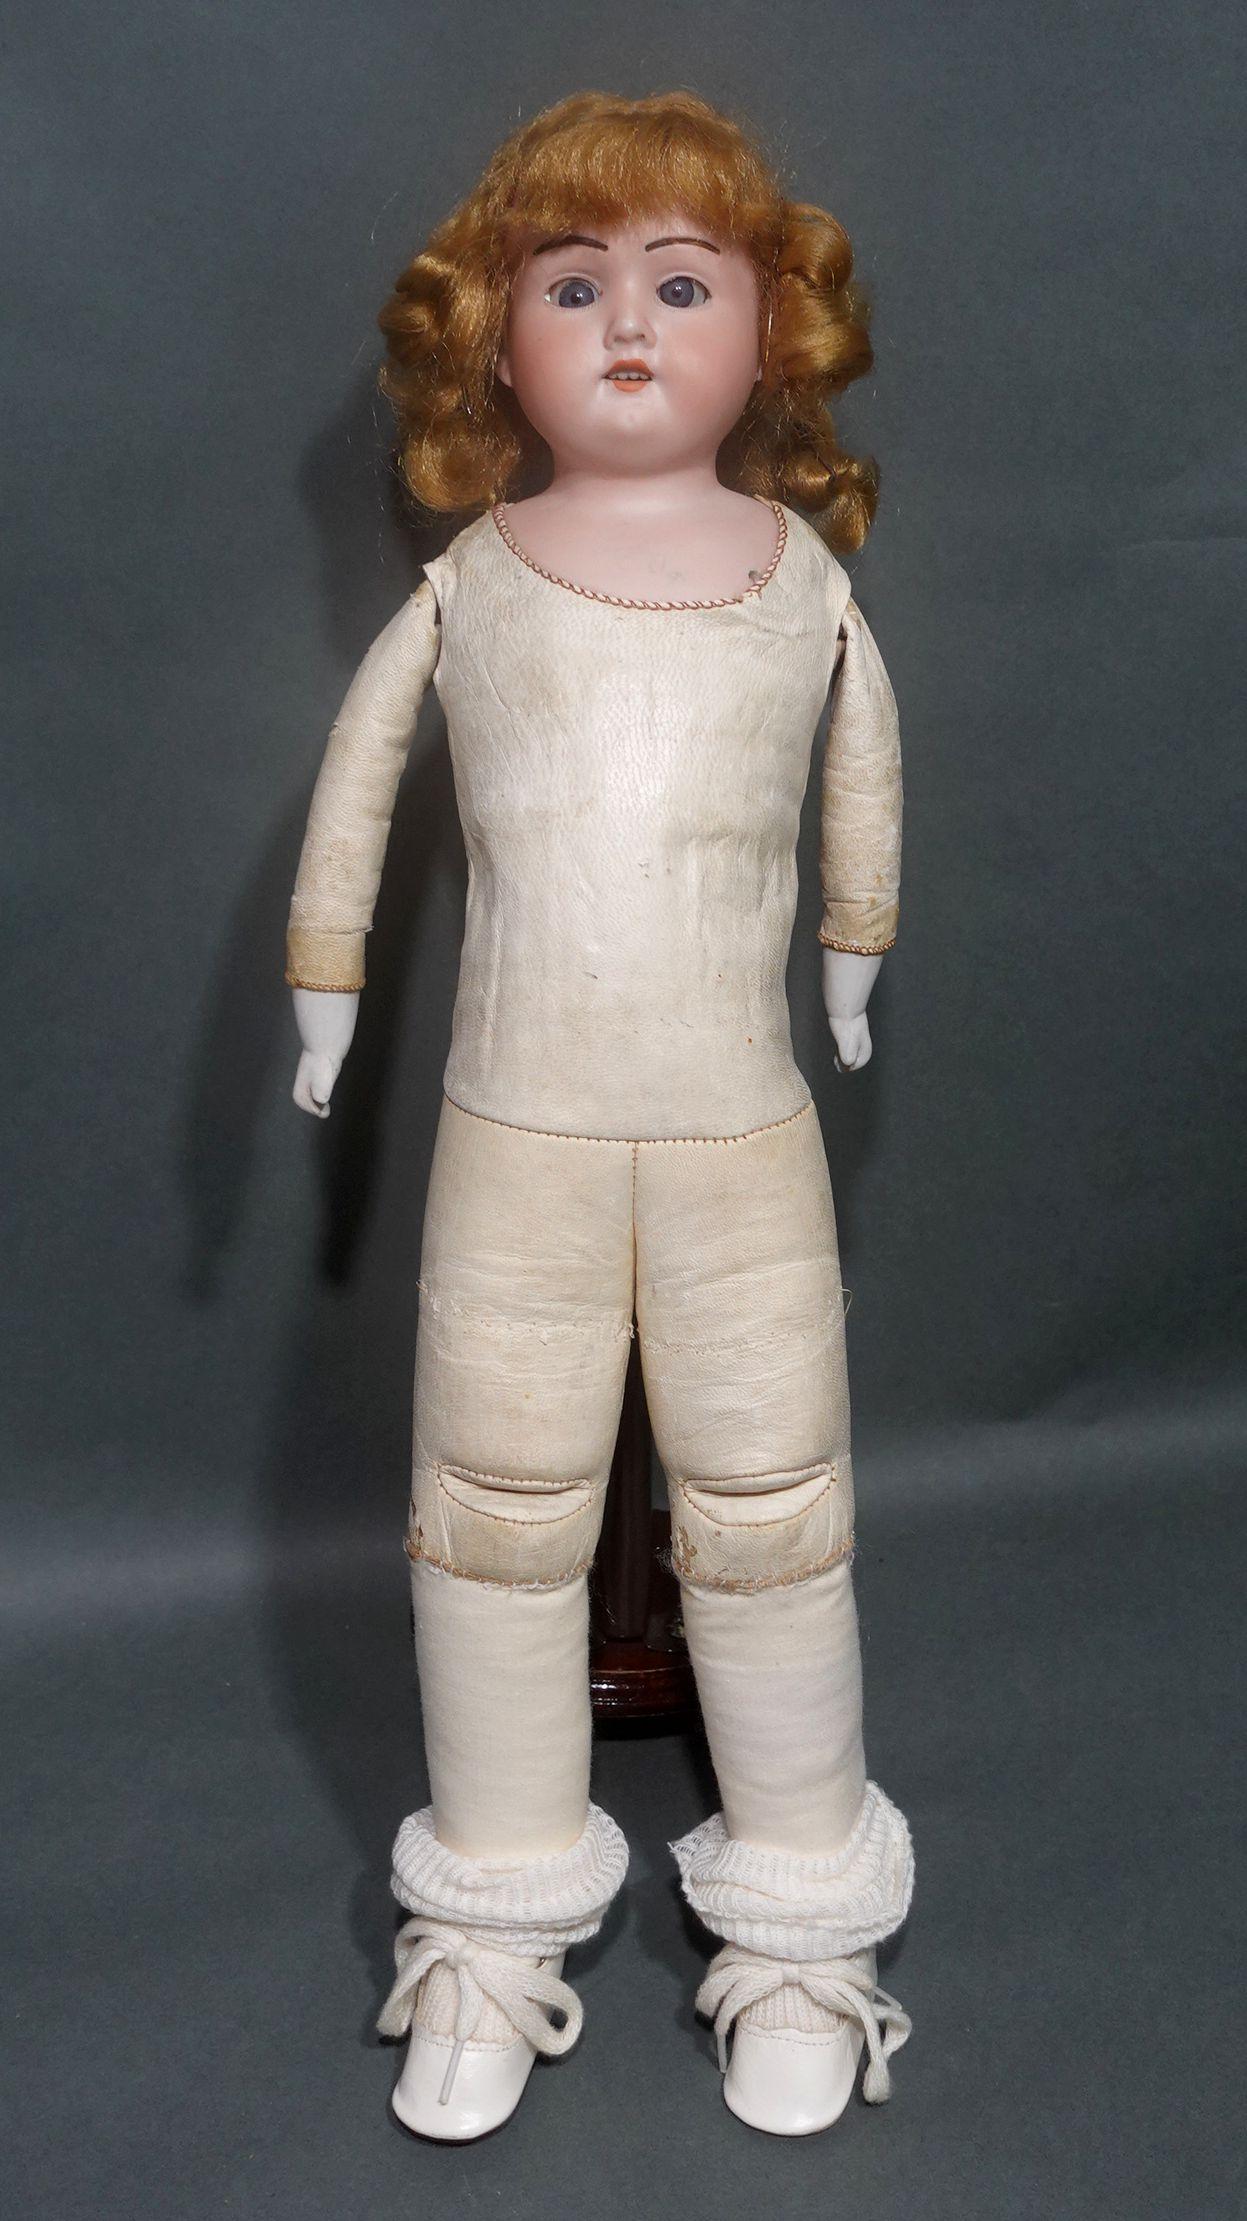 Antique German Bisque Doll 370 A & M-2/OX-DEP Armand Marseille, Ric#003 In Good Condition For Sale In Norton, MA